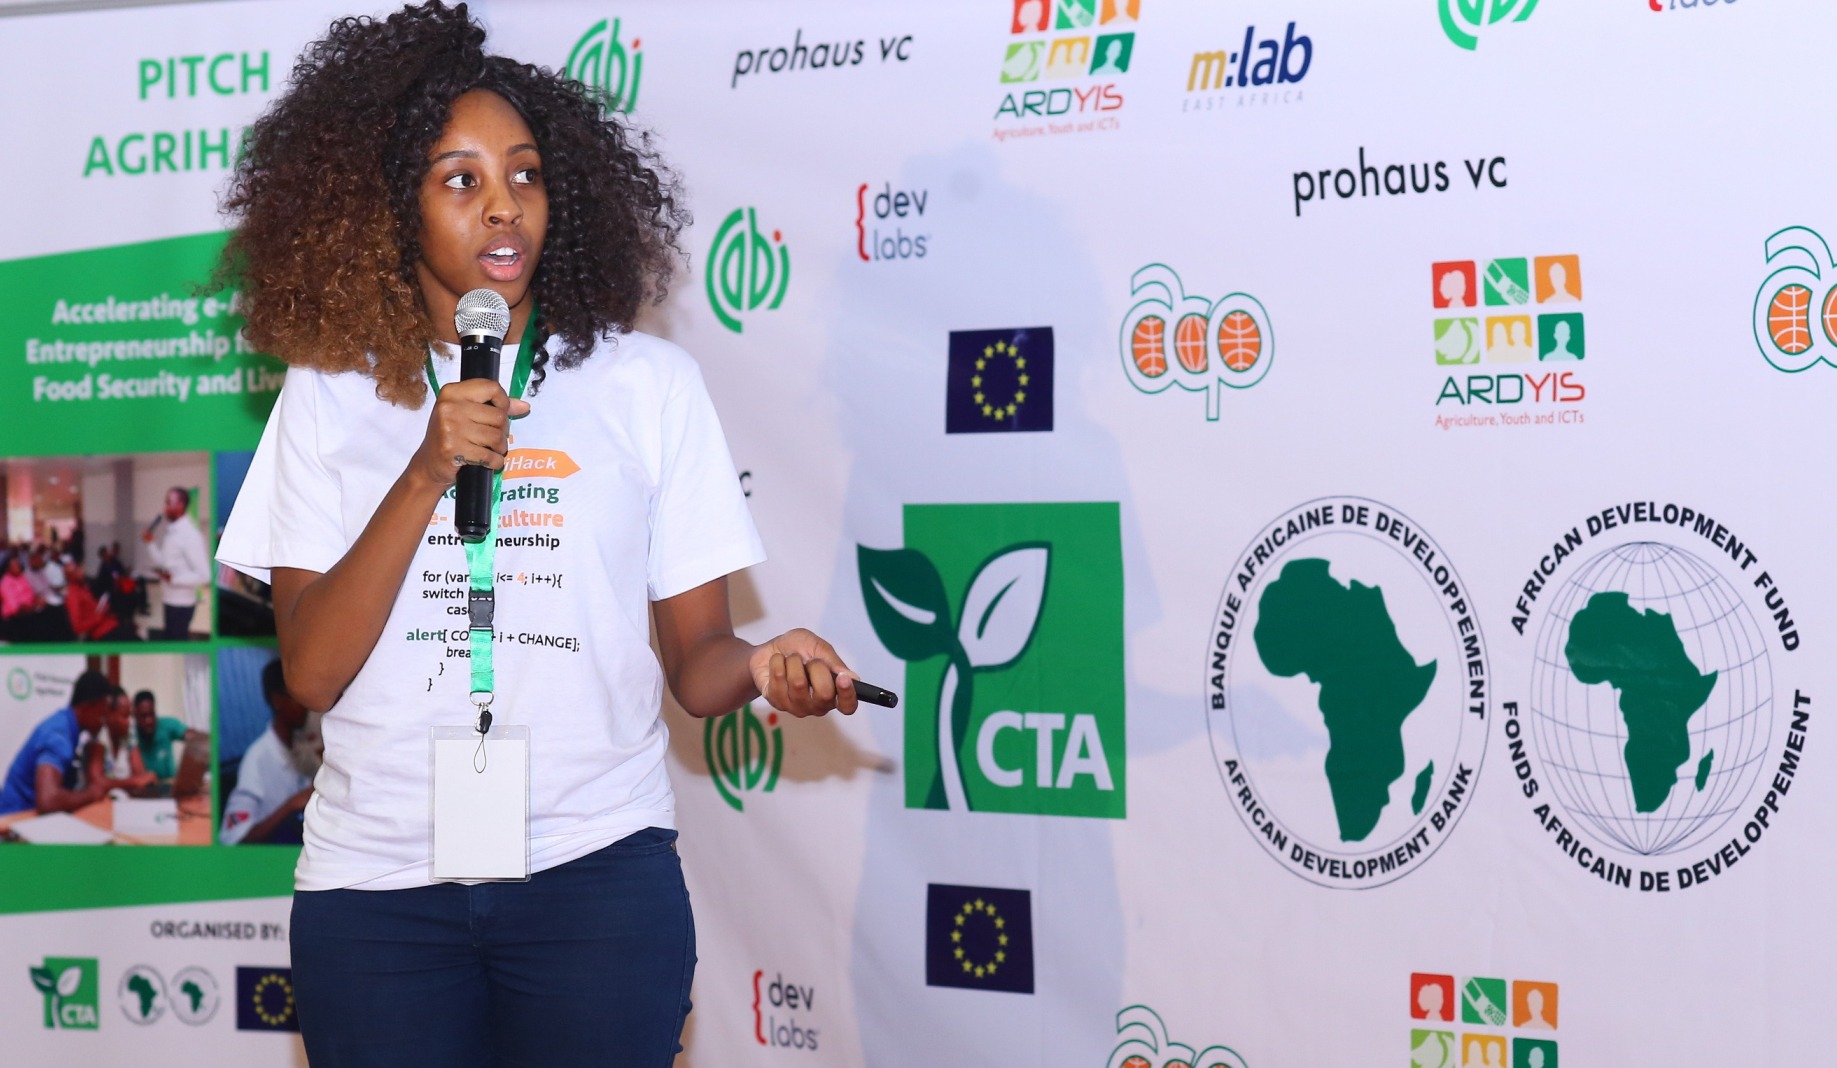 AgriHack competition pitch 2019